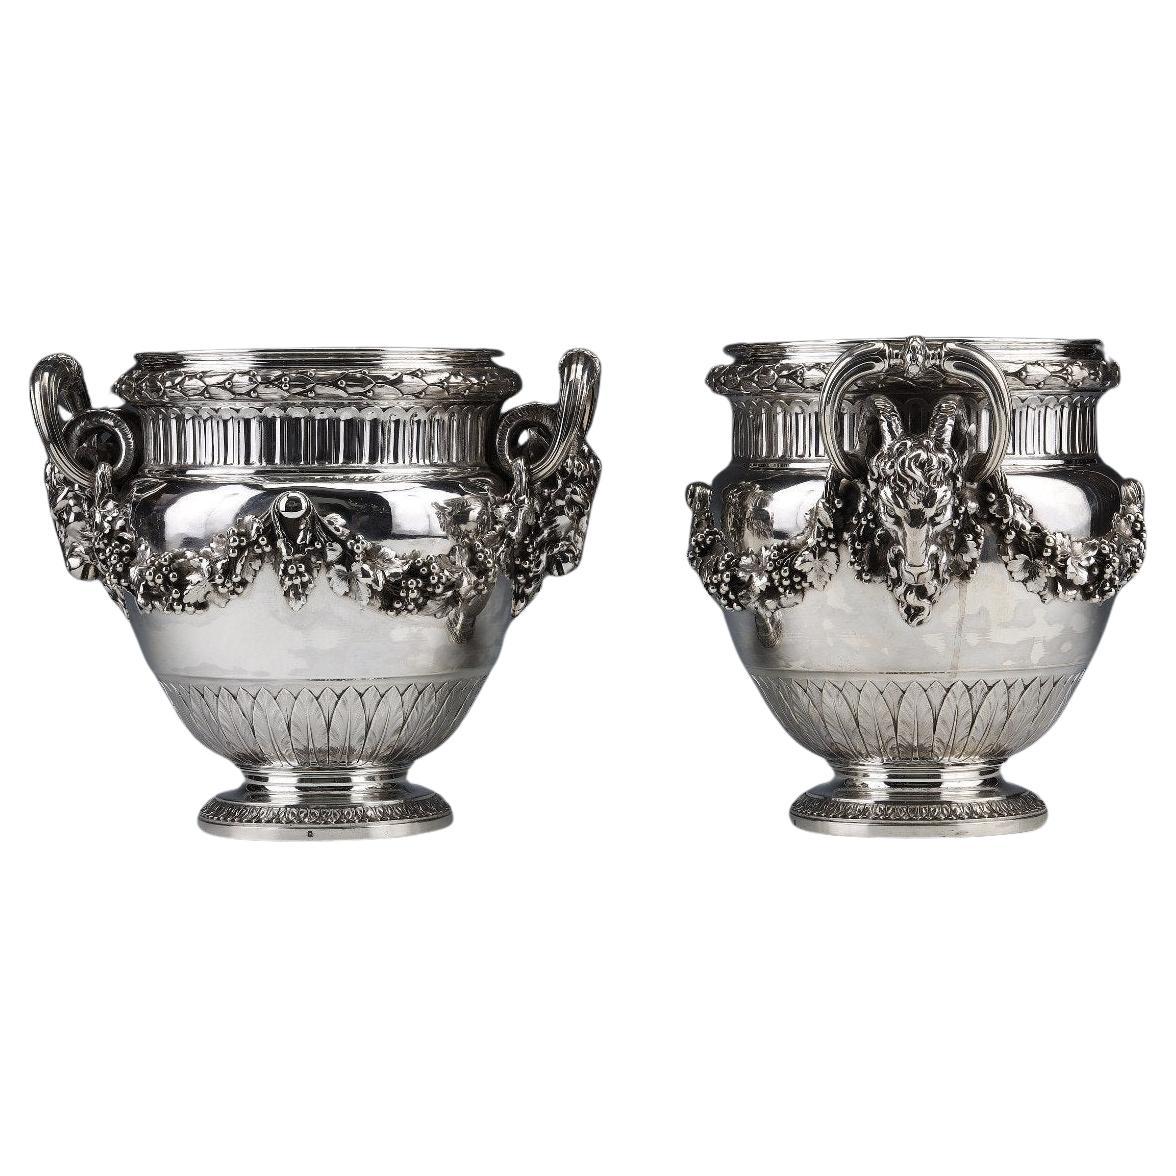 Boin Taburet - Pair Of Solid Silver Wine Coolers Louis XVI - 19th Century For Sale